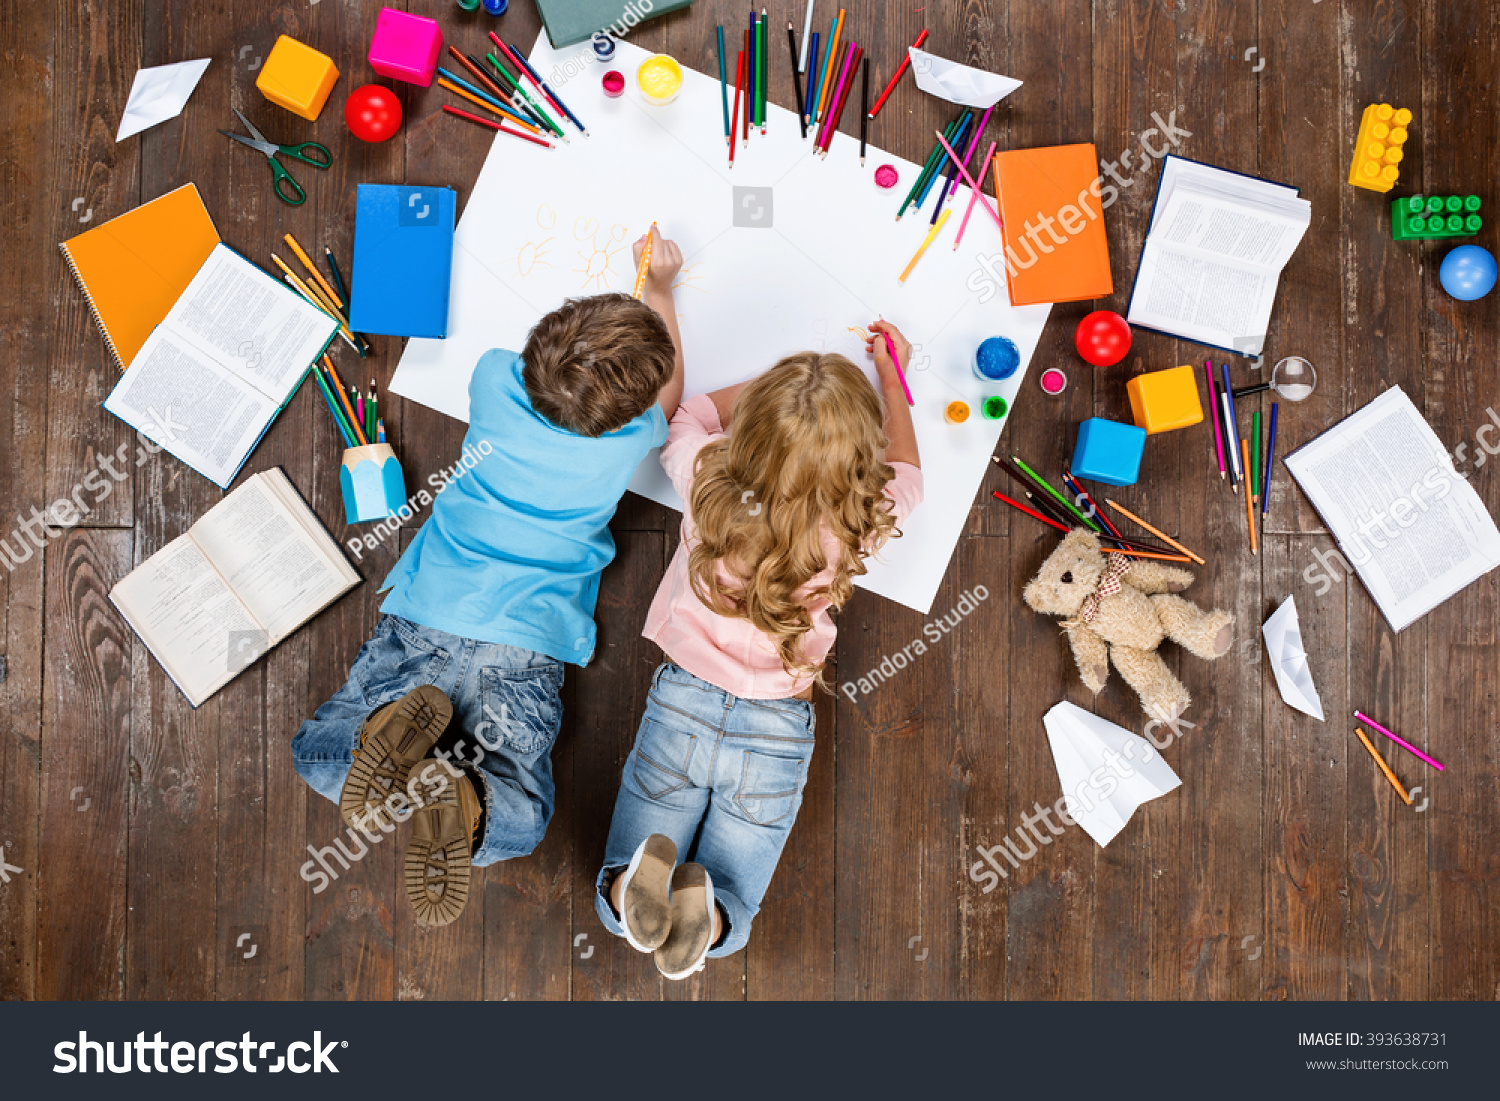 Happy children. Top view creative photo of little boy and girl on vintage brown wooden floor. Children lying near books and toys, and painting #393638731